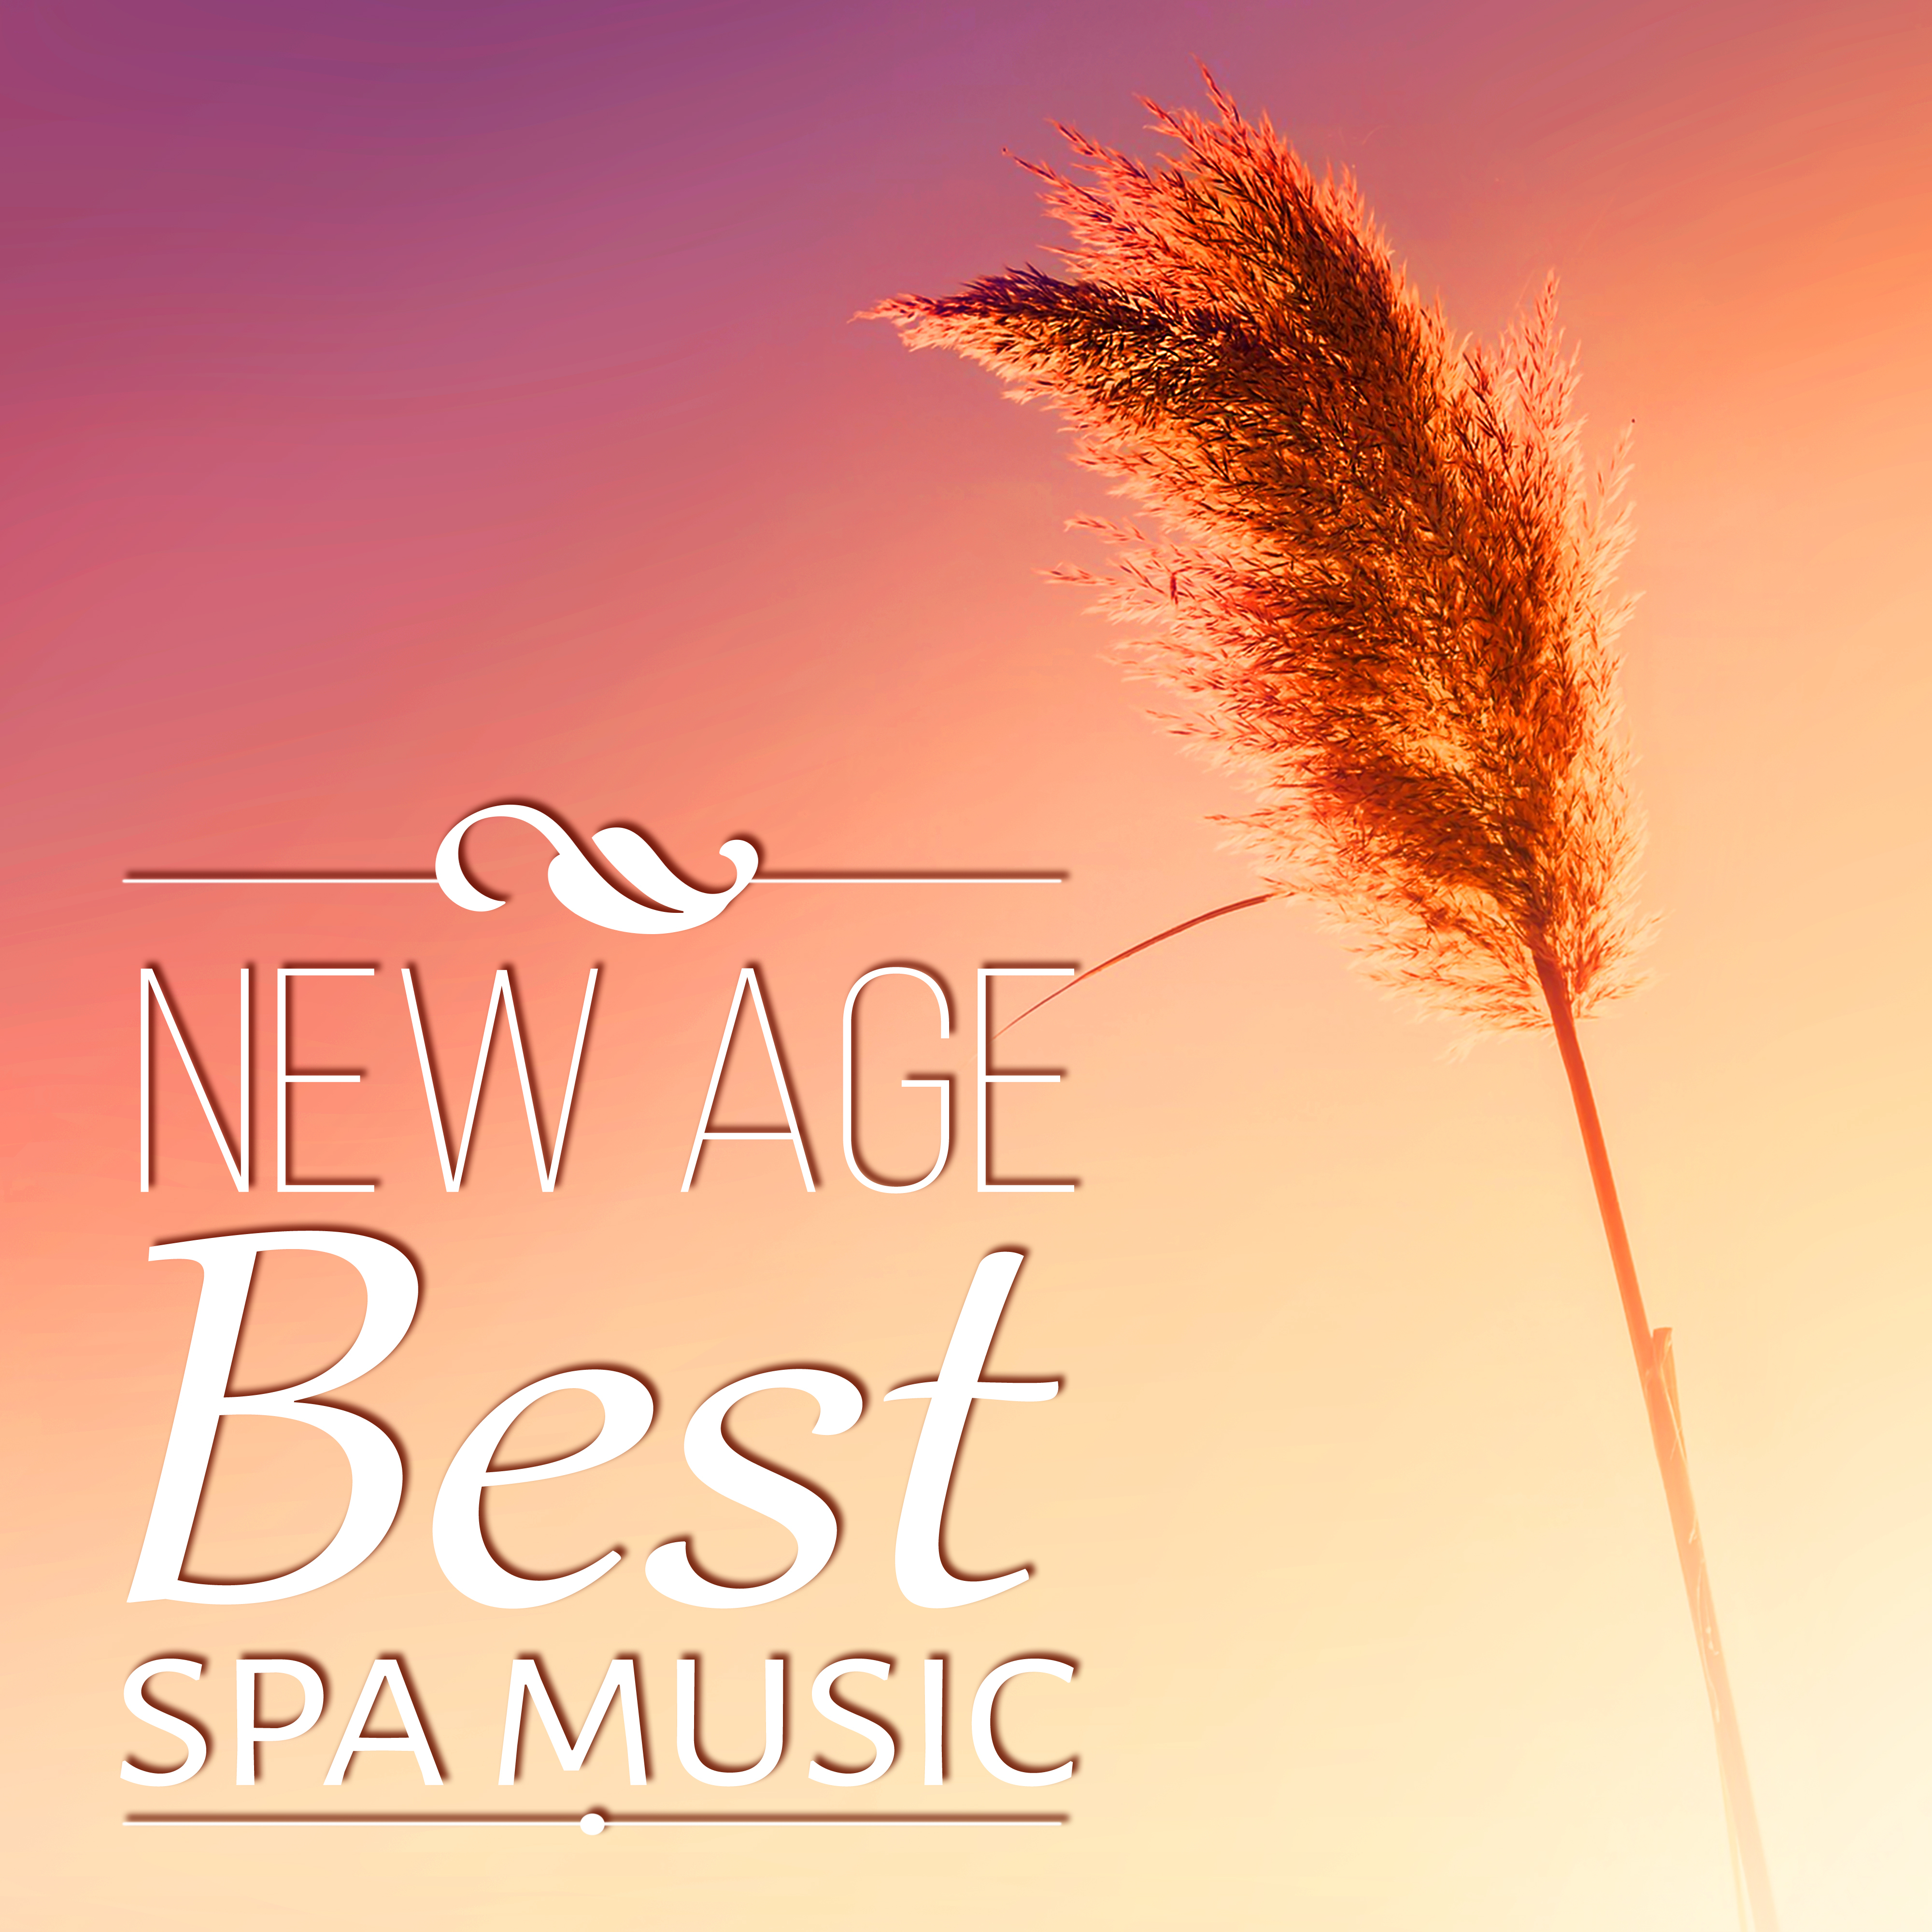 New Age Best Spa Music – Massage Music, Ocean Waves, Hydro Energy, Aromatherapy, Easy Listening, Well Being